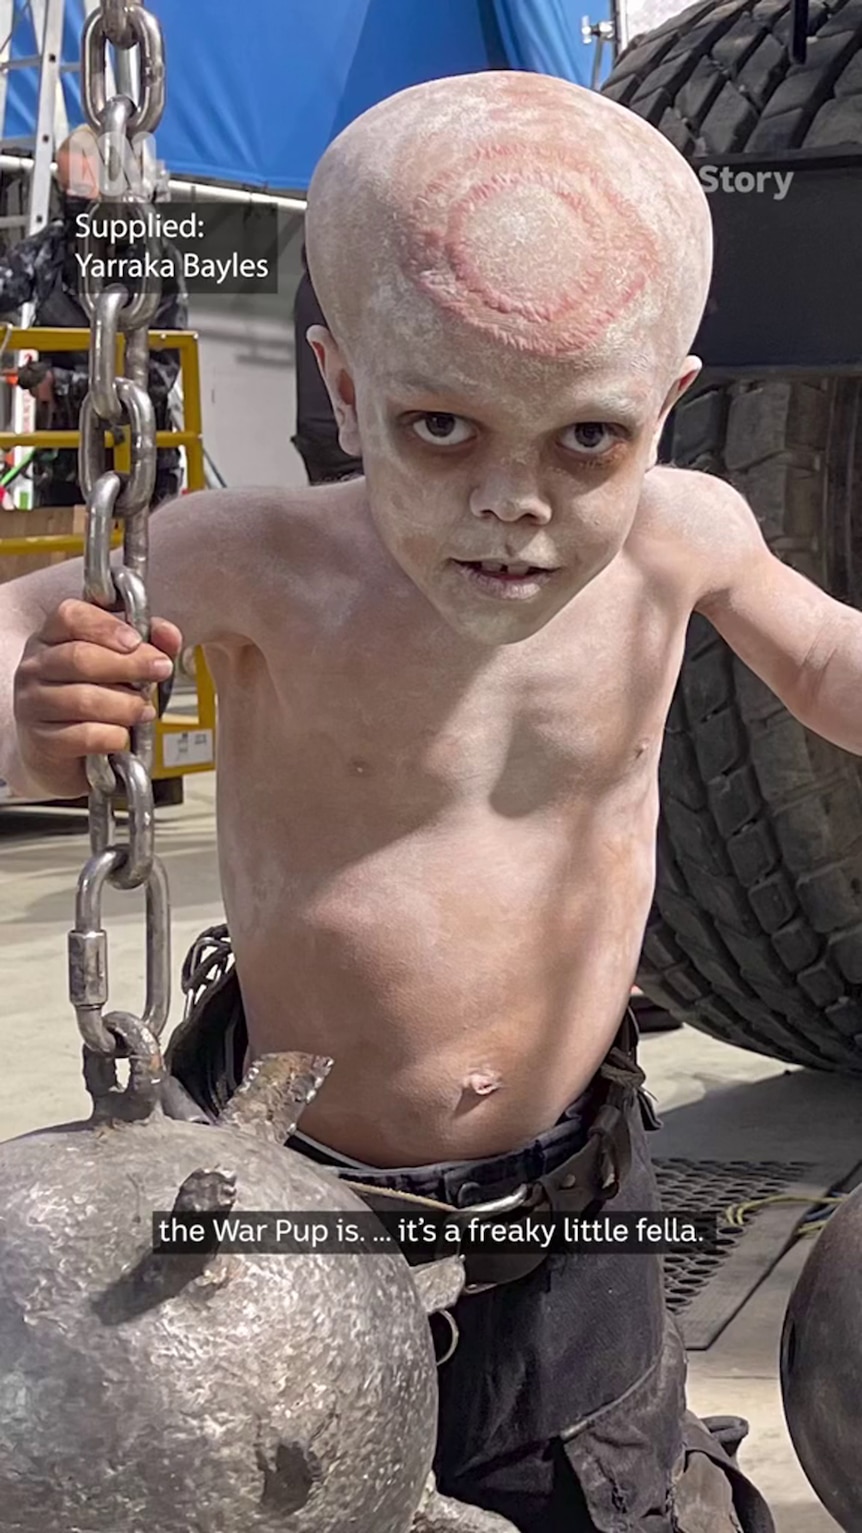 A shirtless boy with medium-tone skin has body paint, including a circular design on his head, and he holds onto a chain